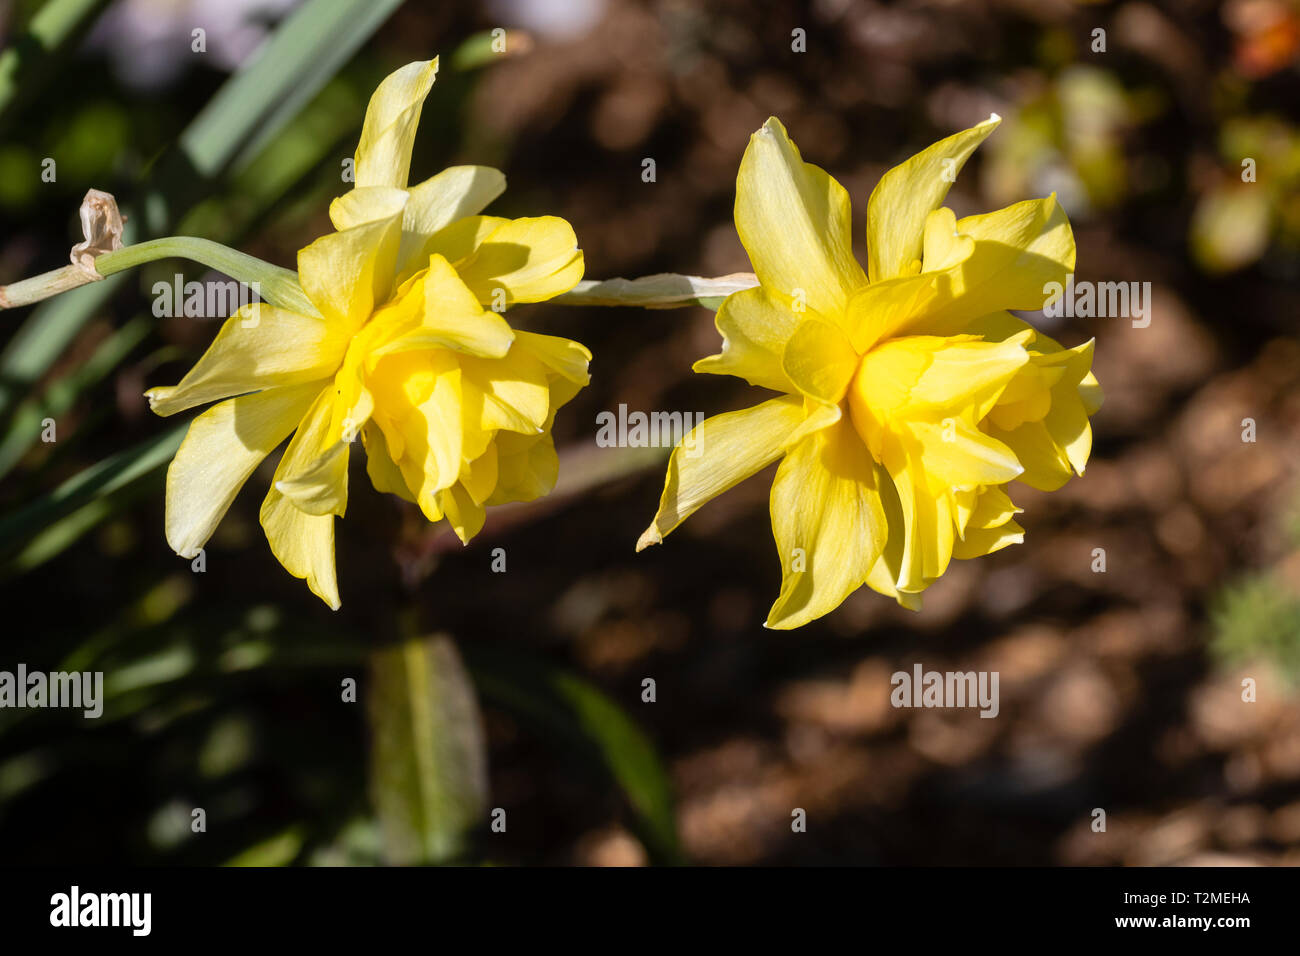 Double flower of the yellow daffodil, Narcissus 'Sulphur Phoenix', a pre 1820 heritage variety Stock Photo